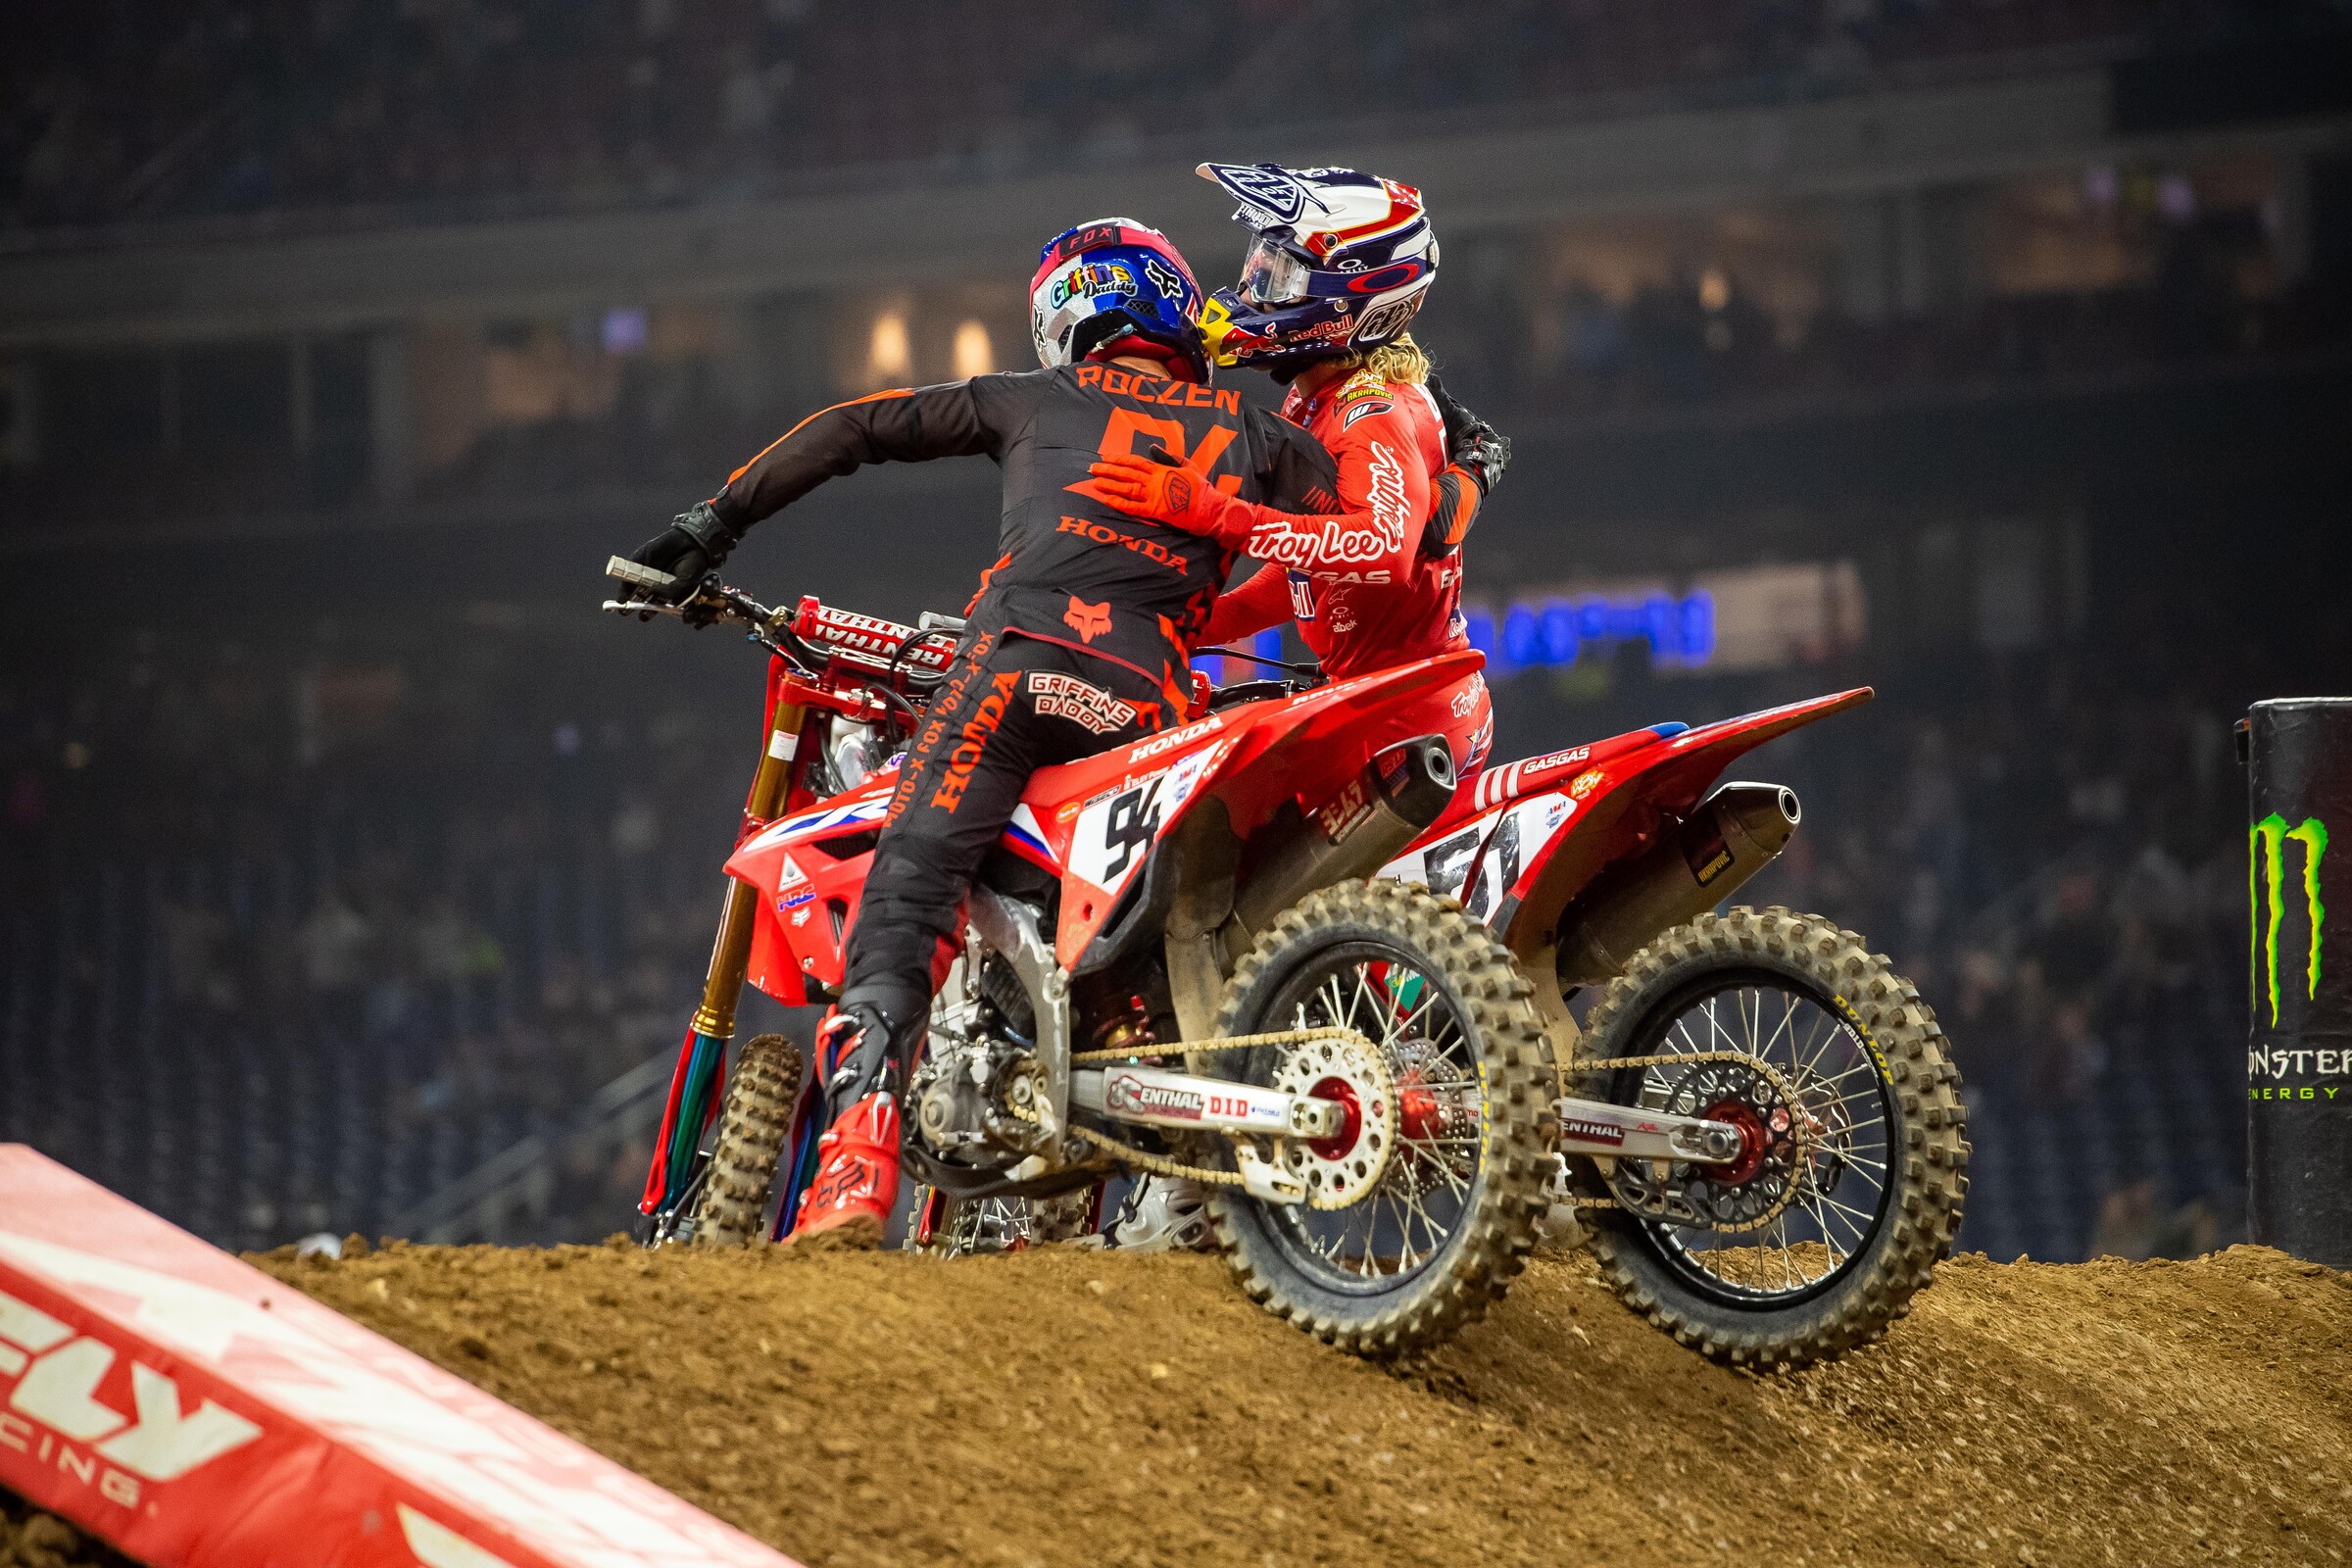 A happy second place finisher behind Justin Barcia, Ken Roczen was all smiles at Houston 1.